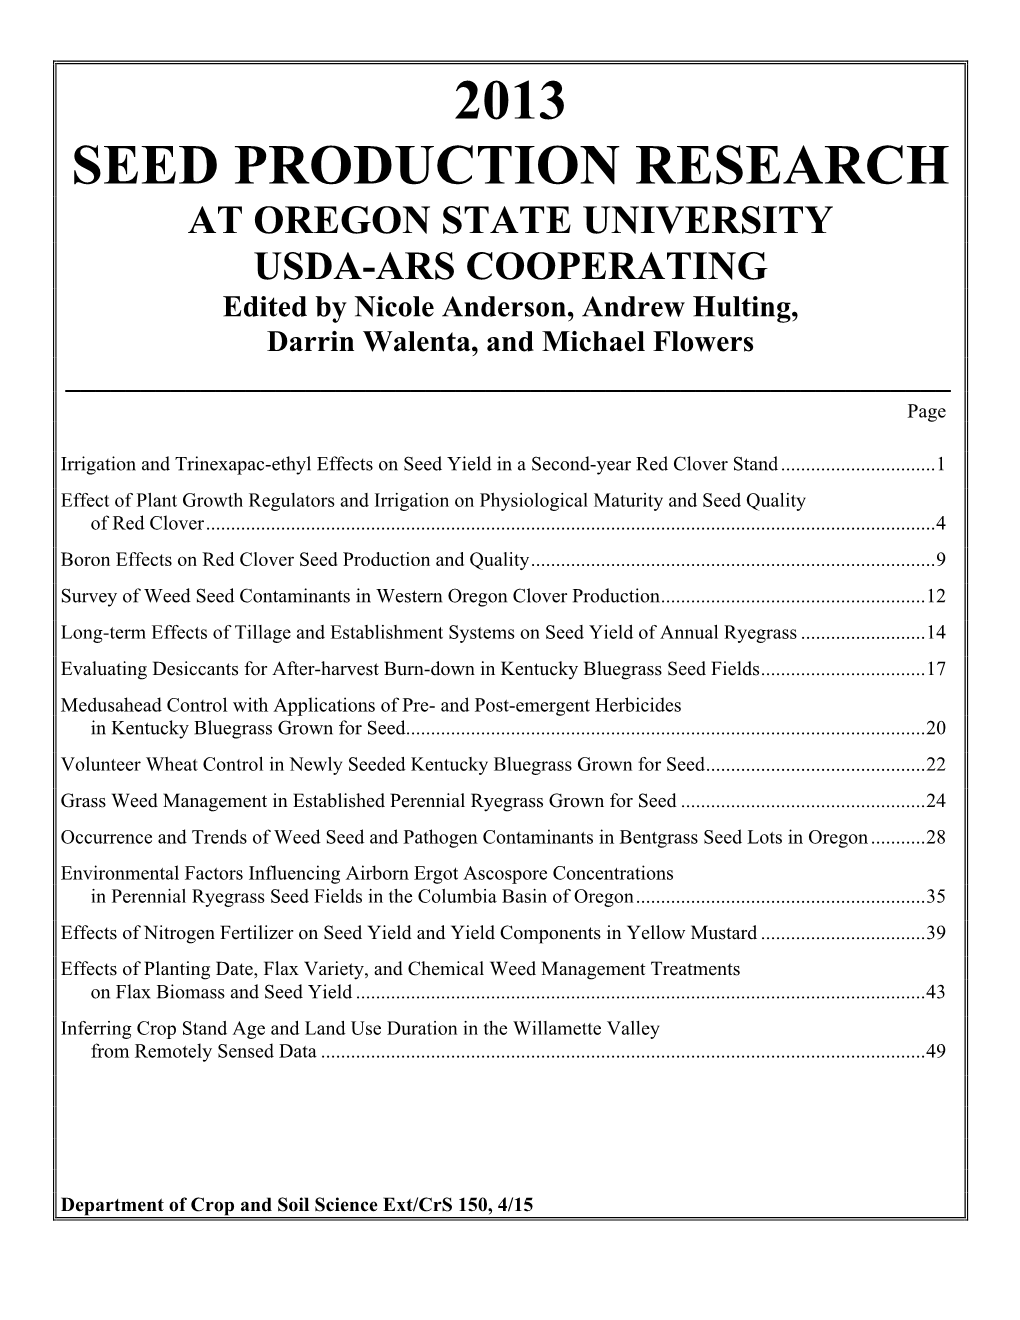 2013 Seed Production Research